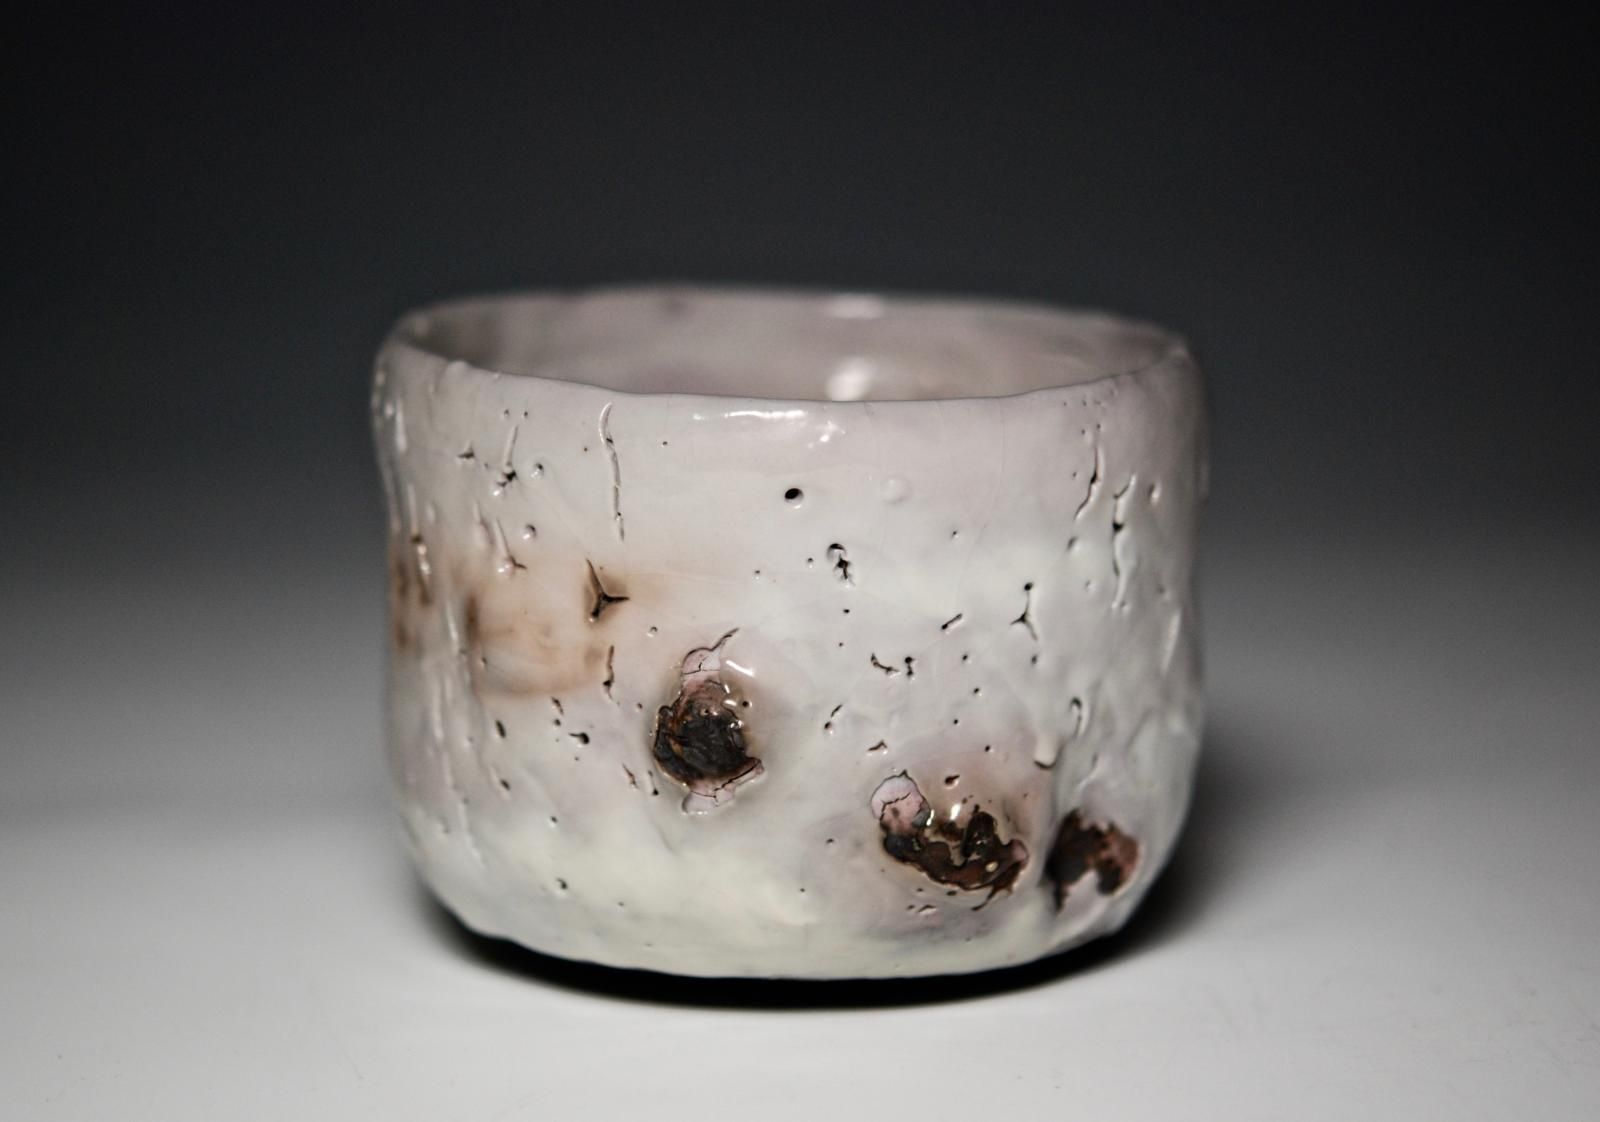 Thrown and altered Chawan, using black stoneware and white shino glaze.  Fired in a reduction atmosphere in an oil fired kiln. by Margaret Curtis